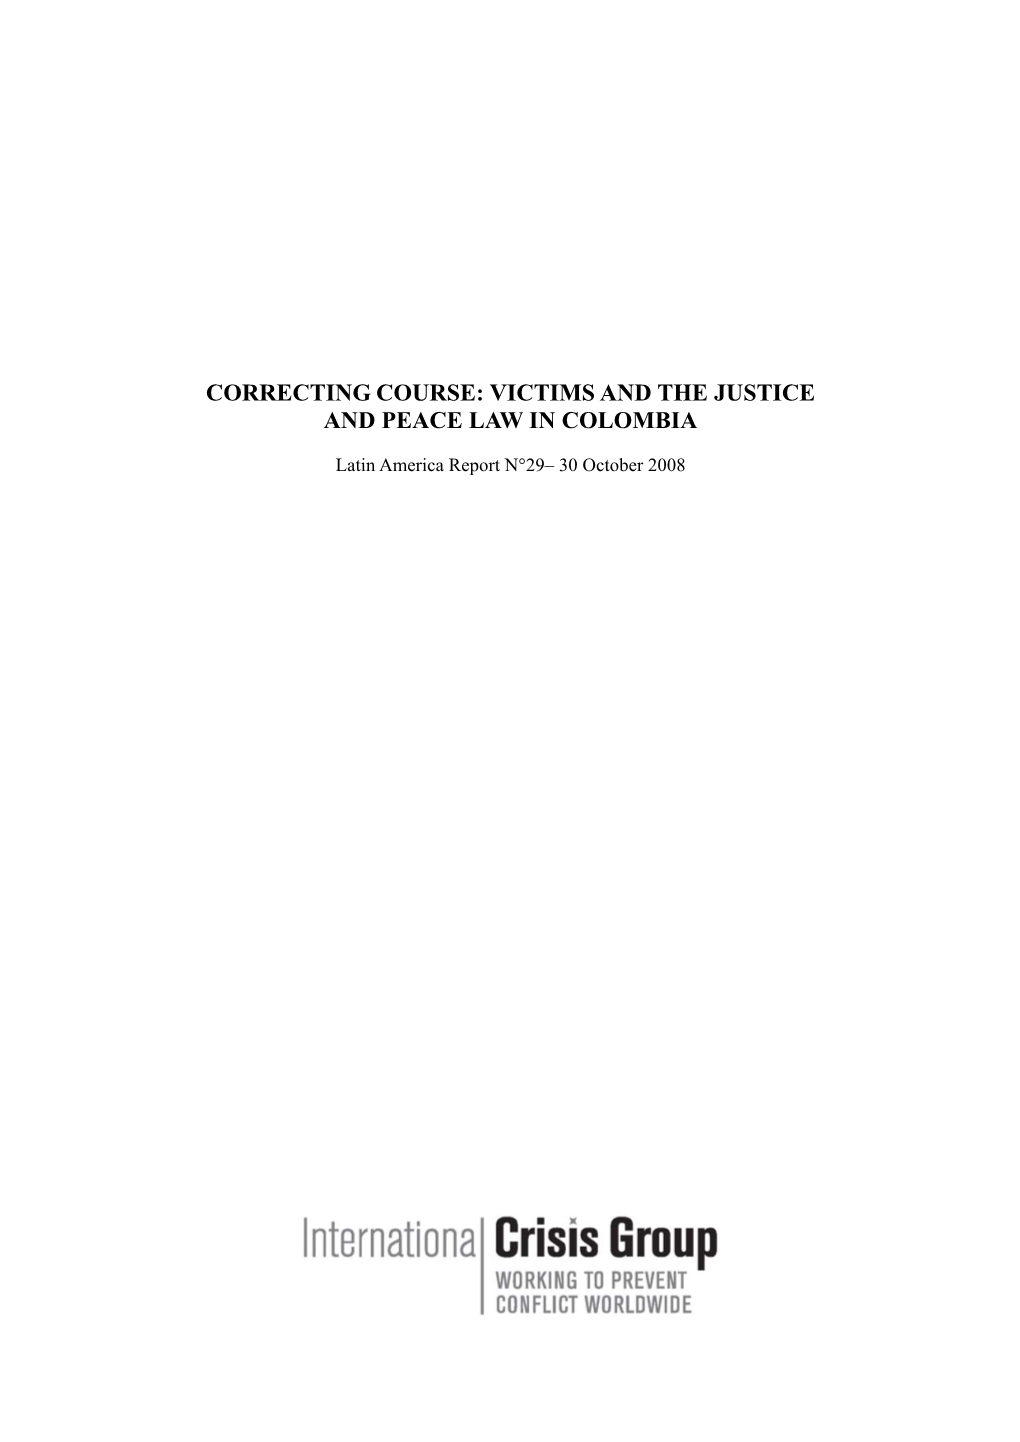 Victims and the Justice and Peace Law in Colombia